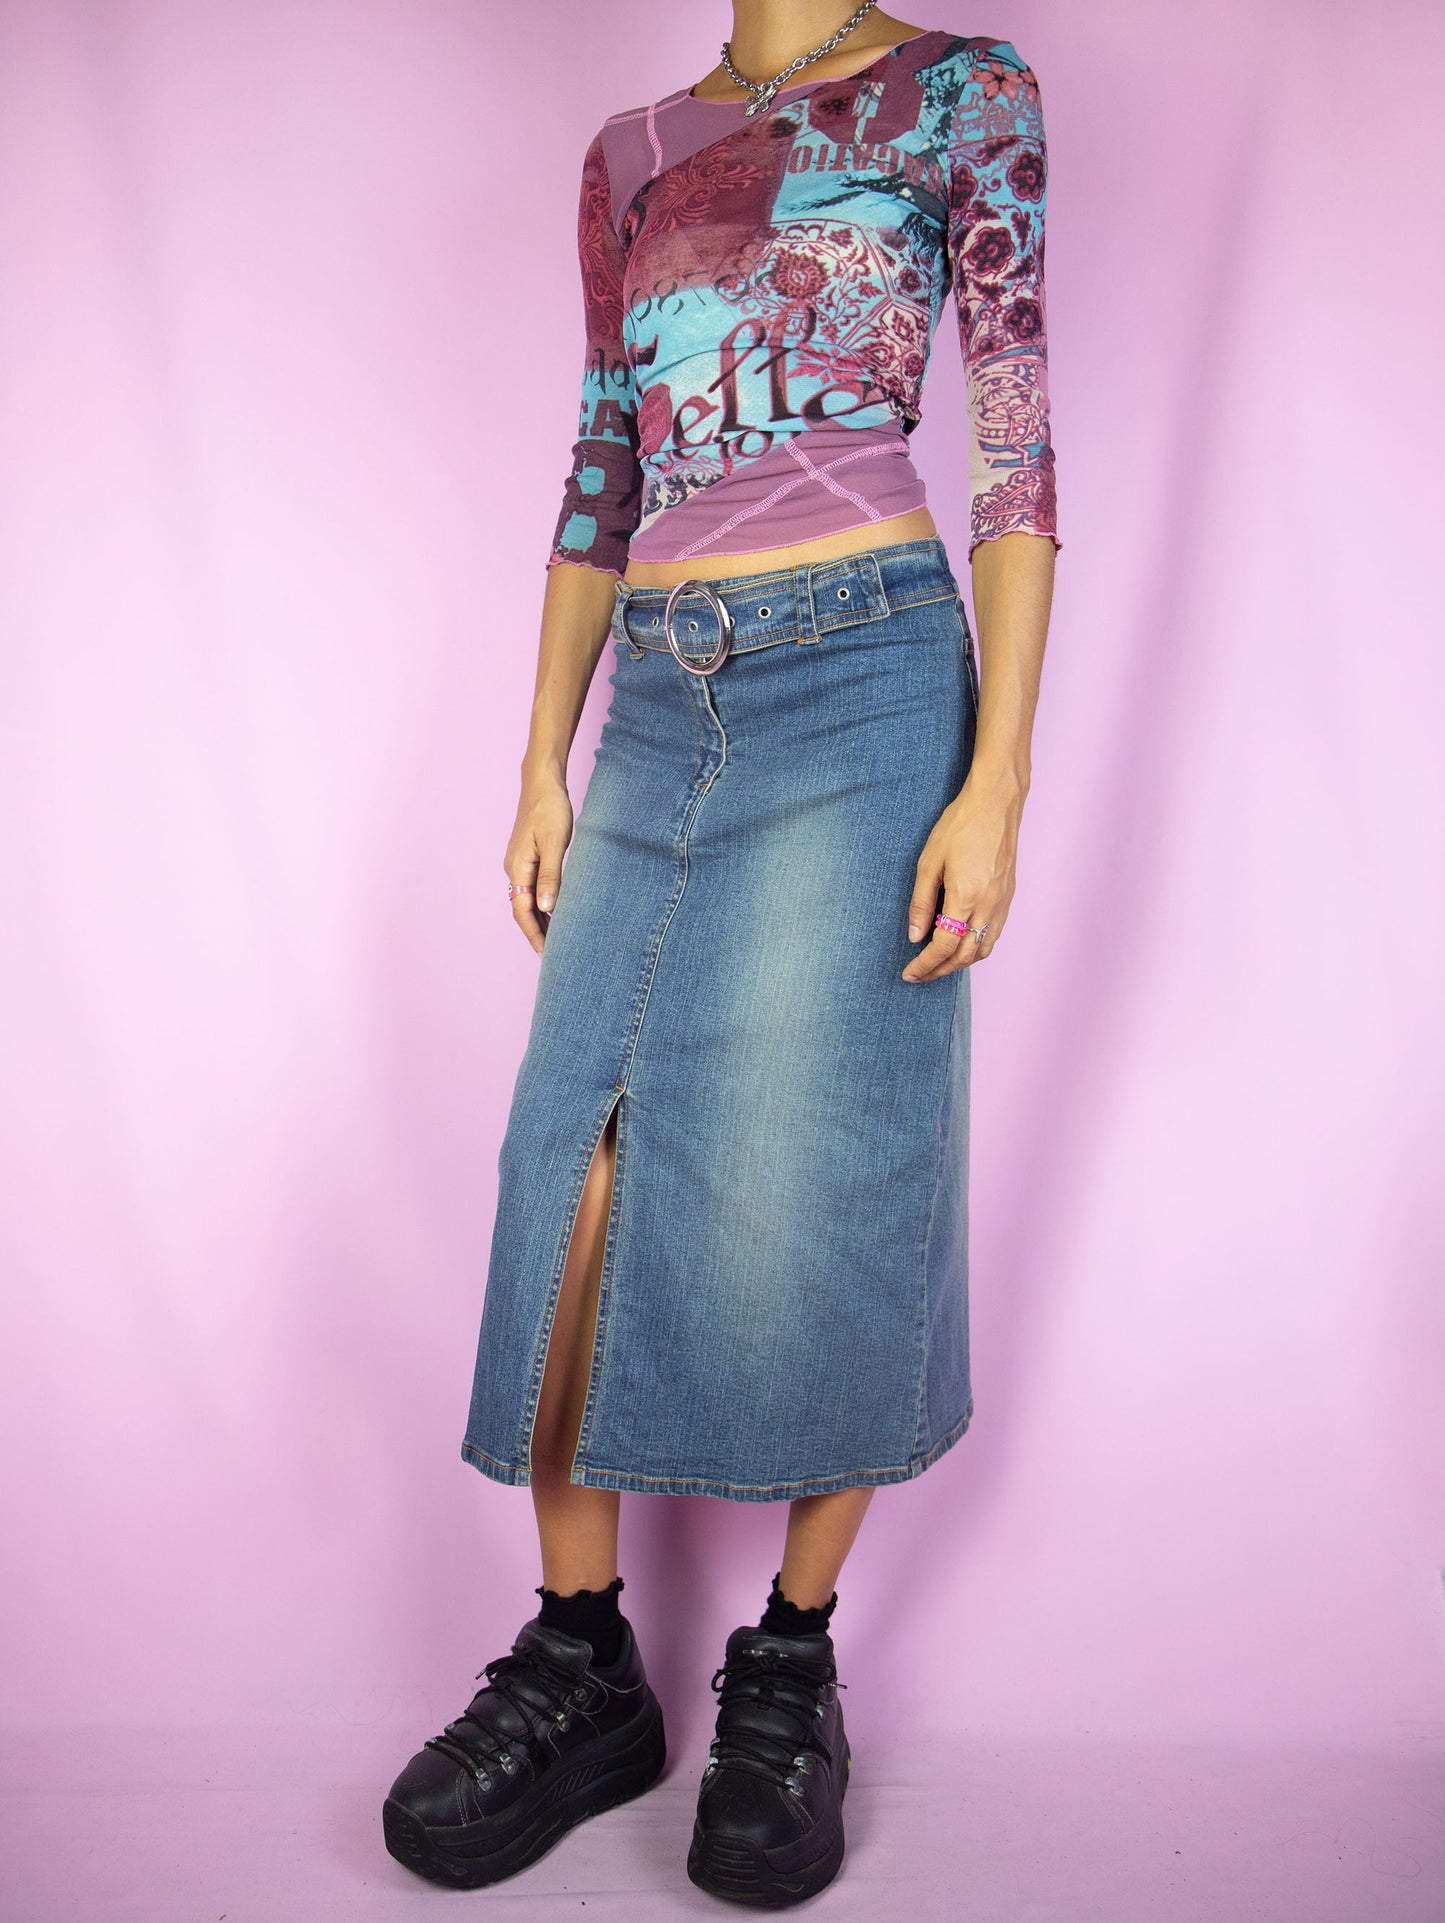 The Y2K Slit Denim Midi Skirt is a vintage stretch denim skirt with a front slit, belt buckle and zipper closure. Cyber grunge 2000s jean maxi skirt.